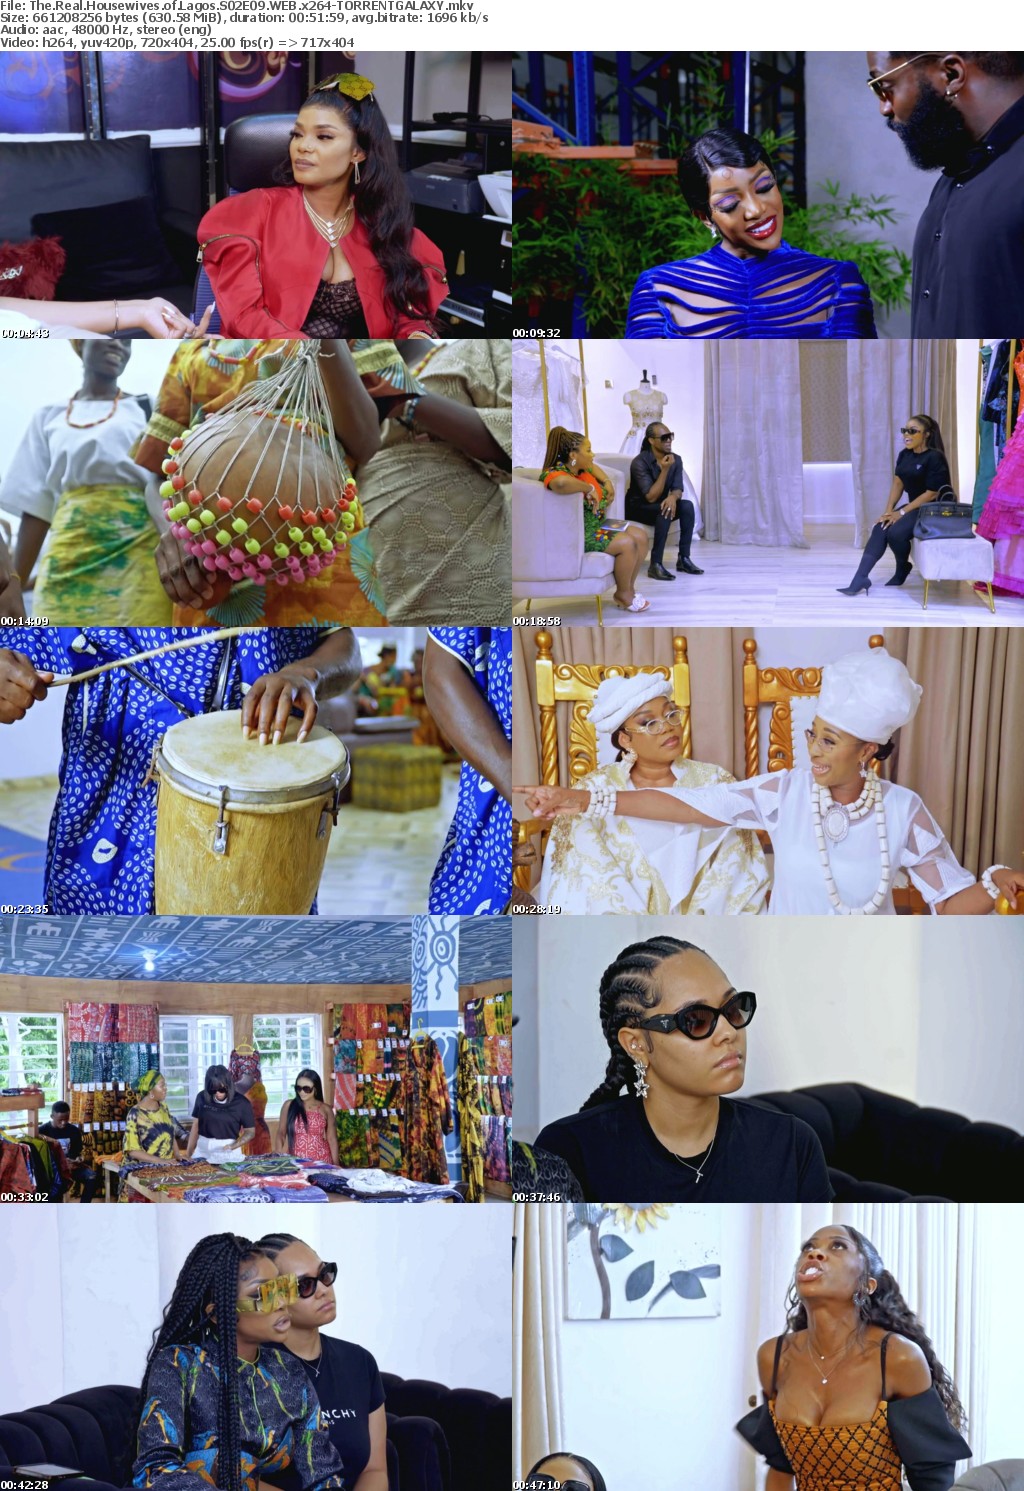 The Real Housewives of Lagos S02E09 WEB x264-GALAXY